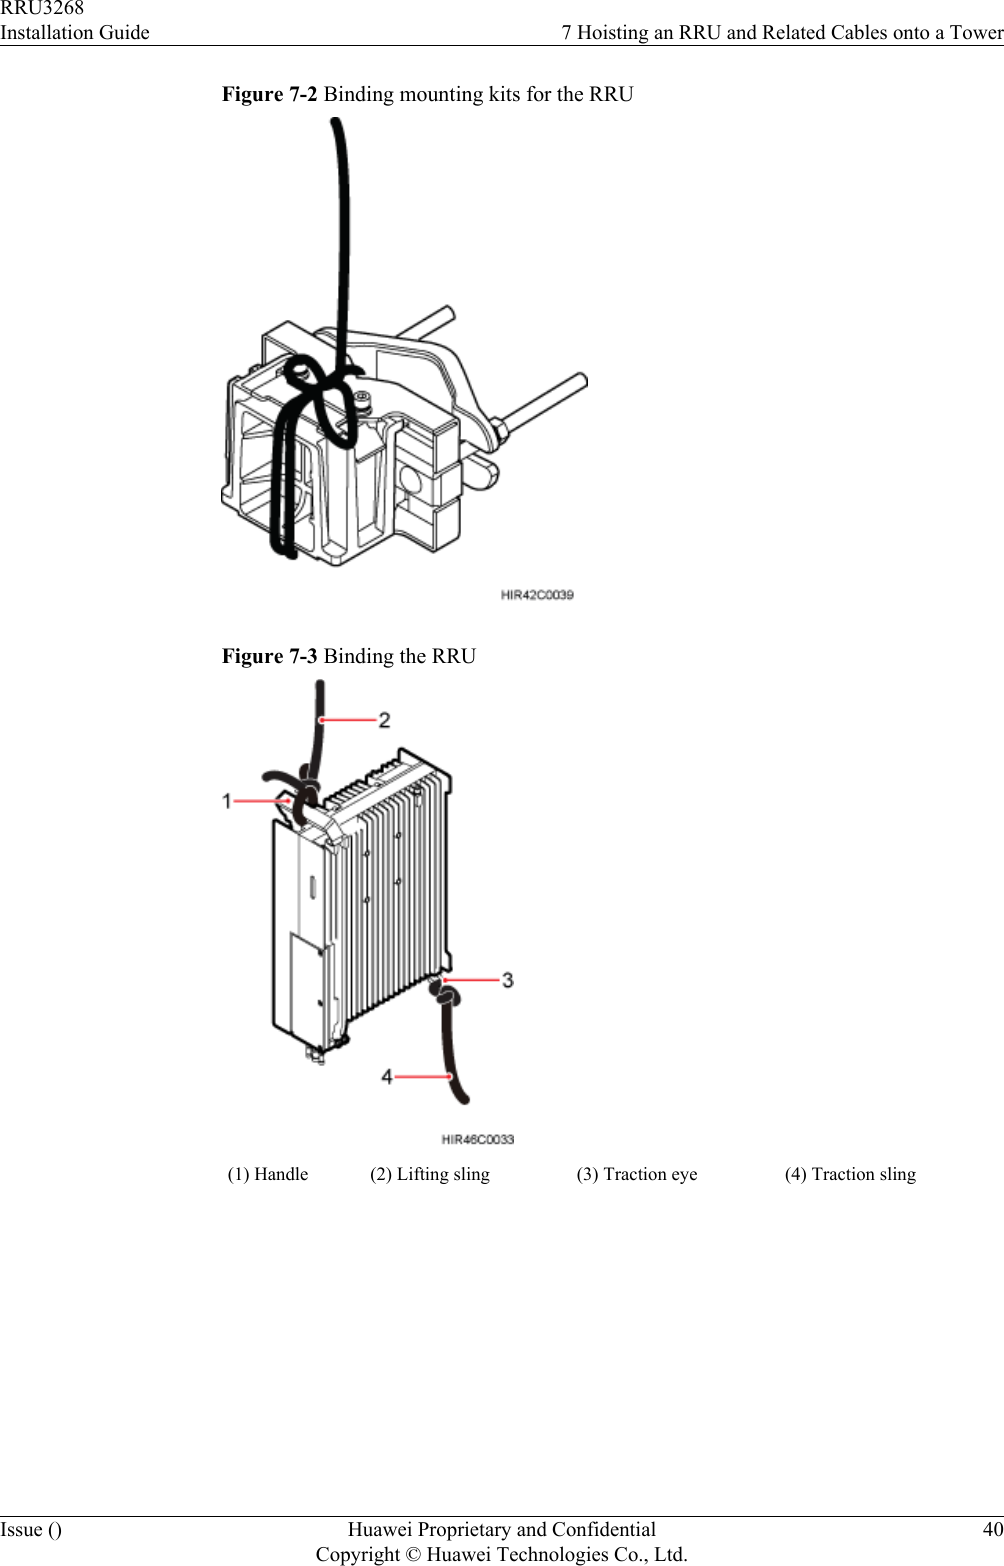 Figure 7-2 Binding mounting kits for the RRUFigure 7-3 Binding the RRU(1) Handle (2) Lifting sling (3) Traction eye (4) Traction sling RRU3268Installation Guide 7 Hoisting an RRU and Related Cables onto a TowerIssue () Huawei Proprietary and ConfidentialCopyright © Huawei Technologies Co., Ltd.40